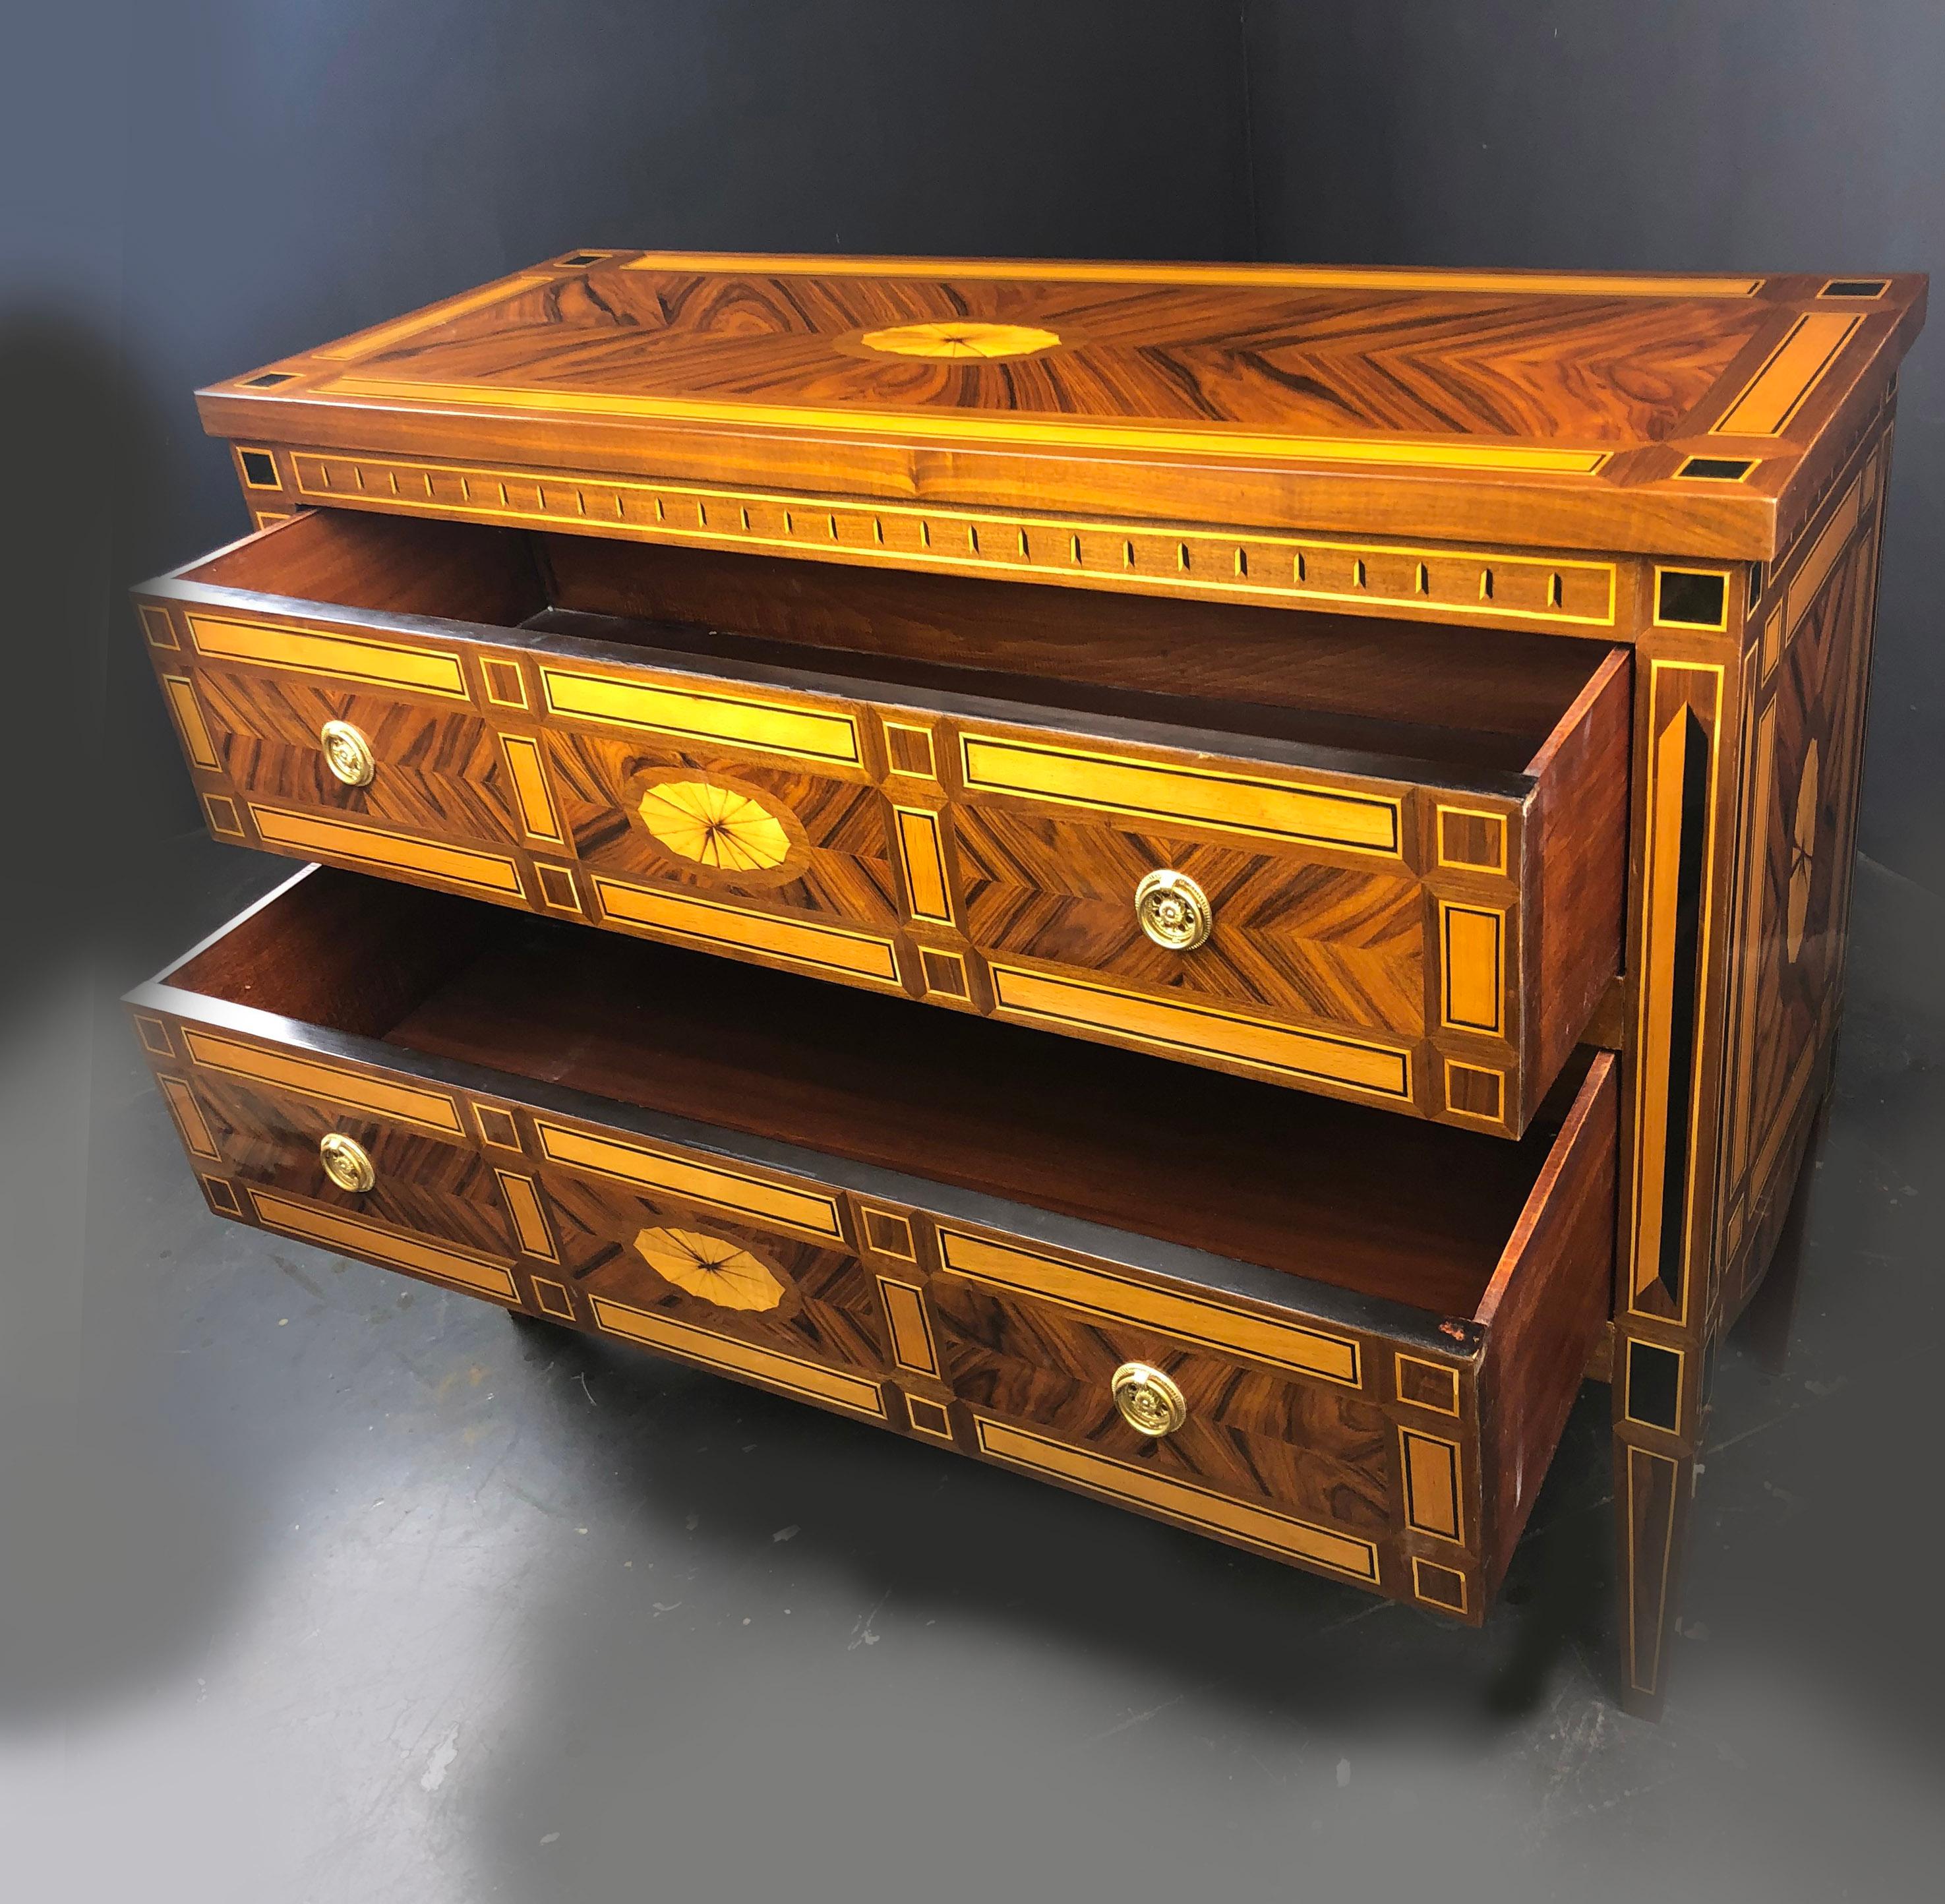 2-Drawer Hall Commode with Outstanding Parquetry (Ebenholz)